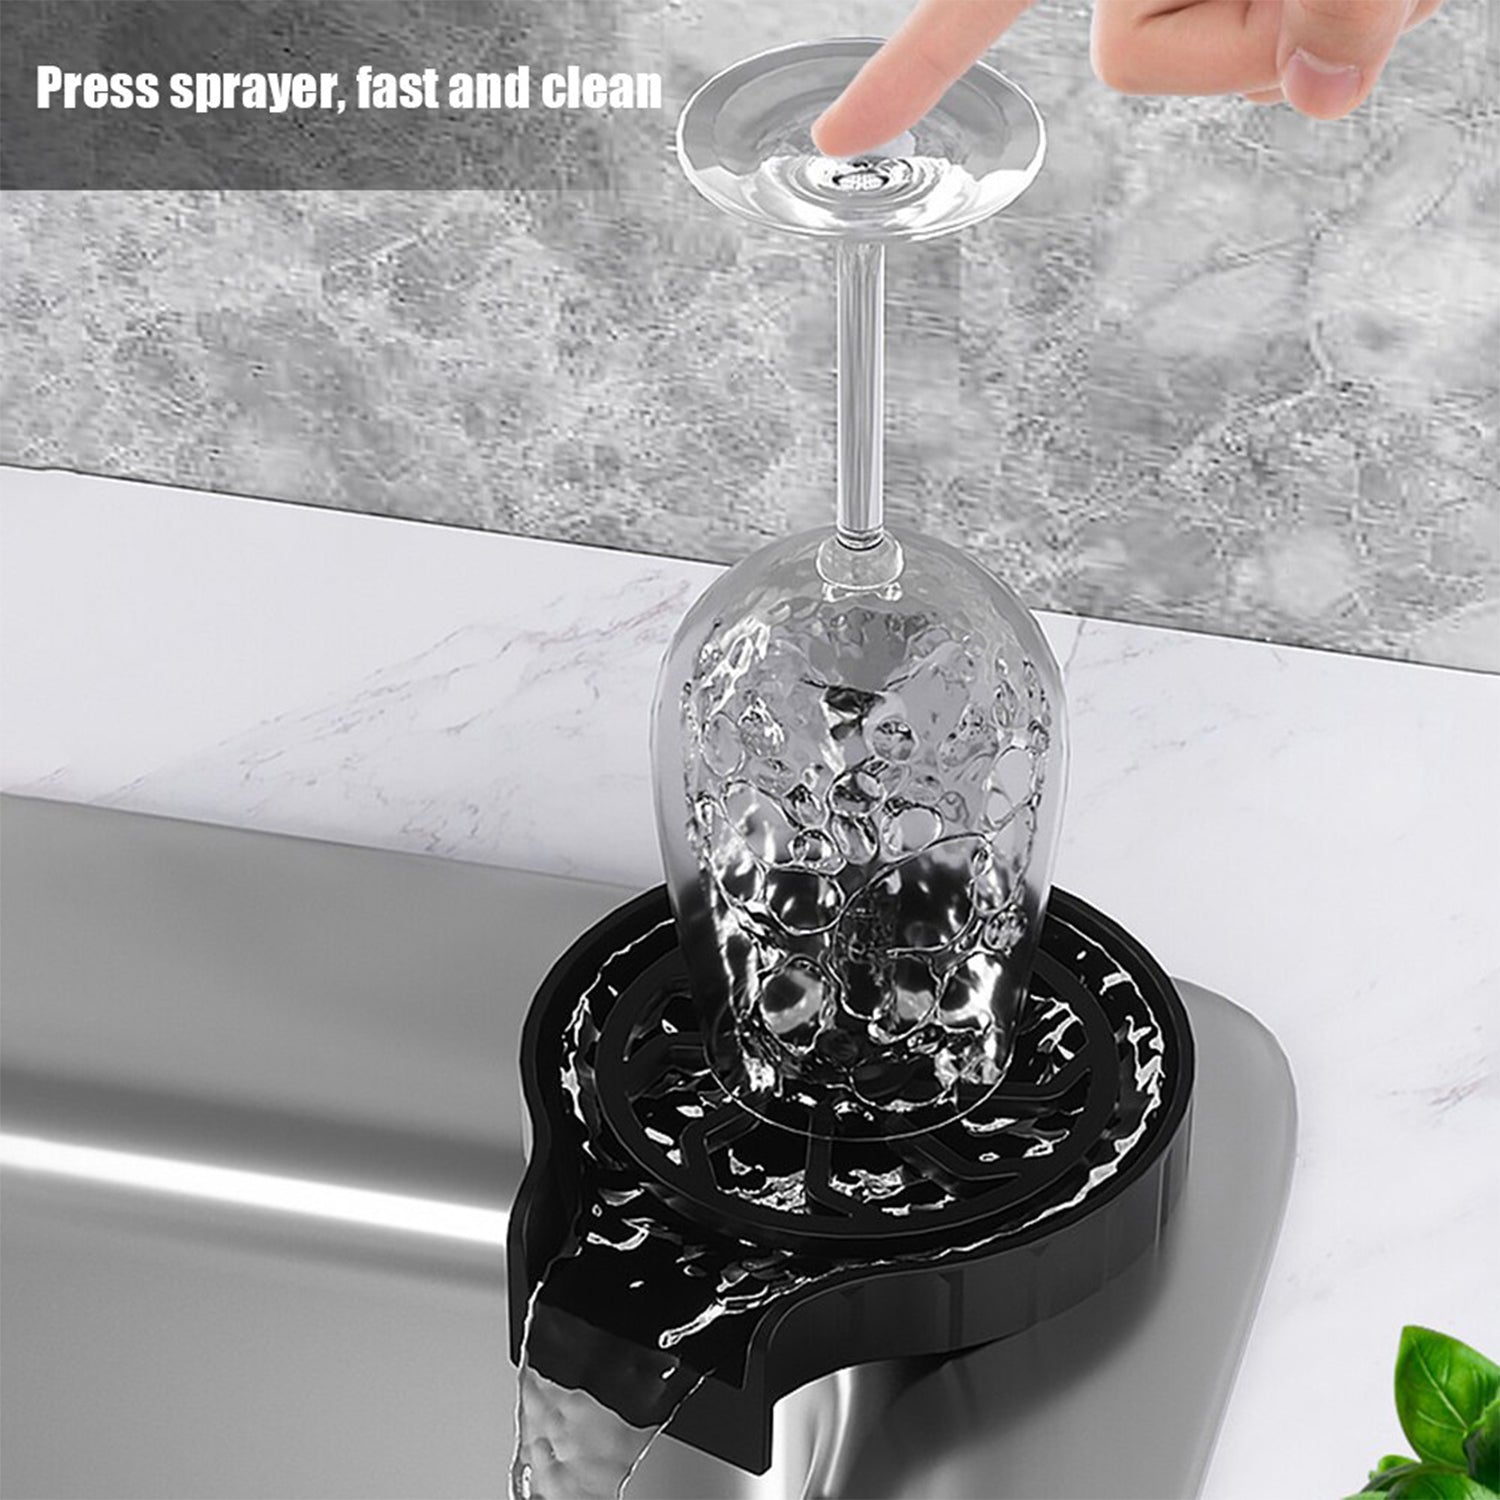 2903 Glass Rinser for Kitchen Sinks, Automatic Cup Washer for Sink, Fast Cleaning Faucet Bar DeoDap